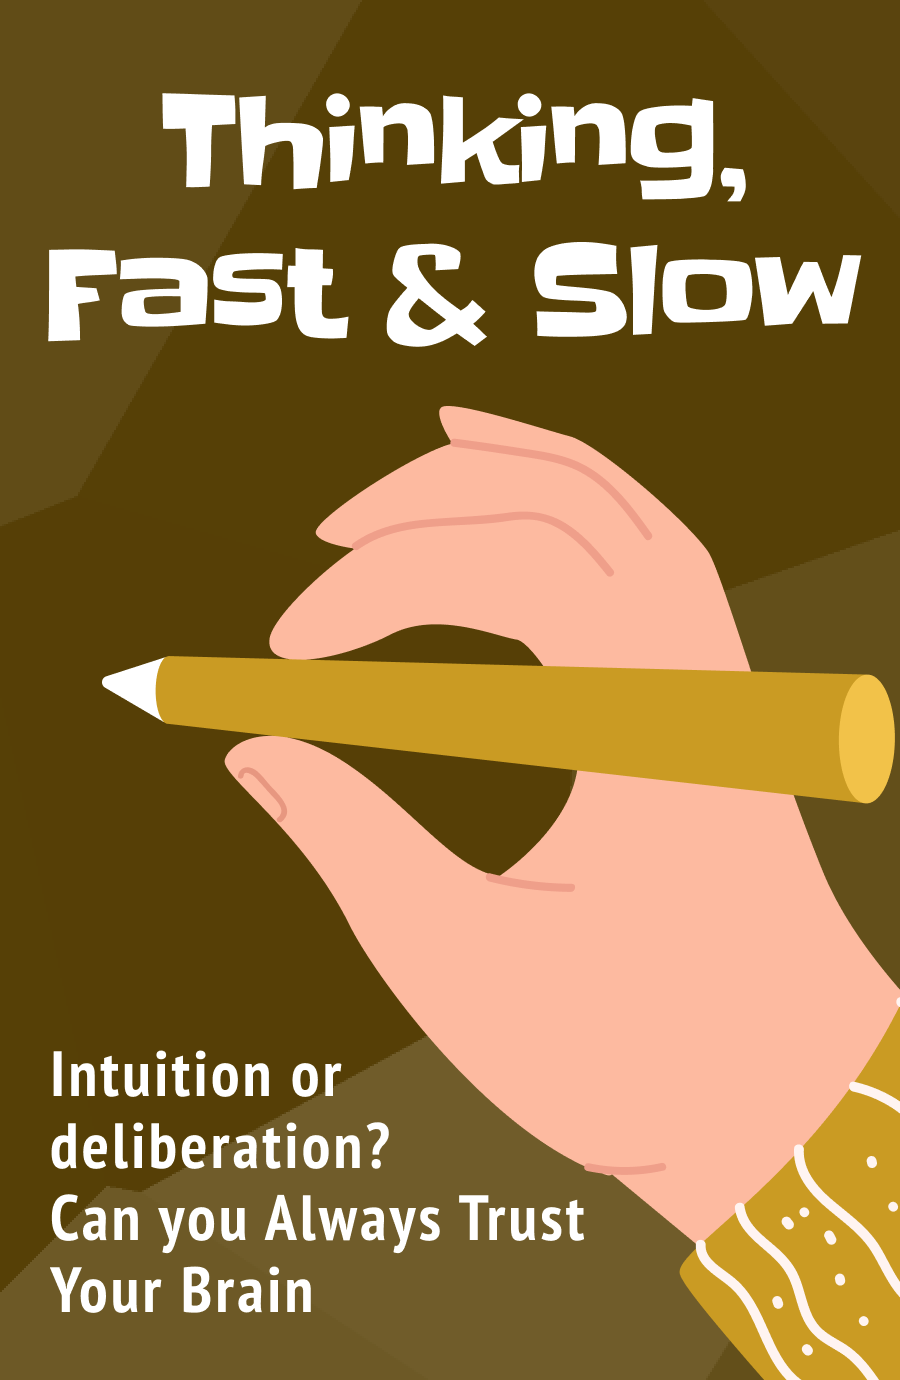 Thinking, Fast and Slow Book Cover